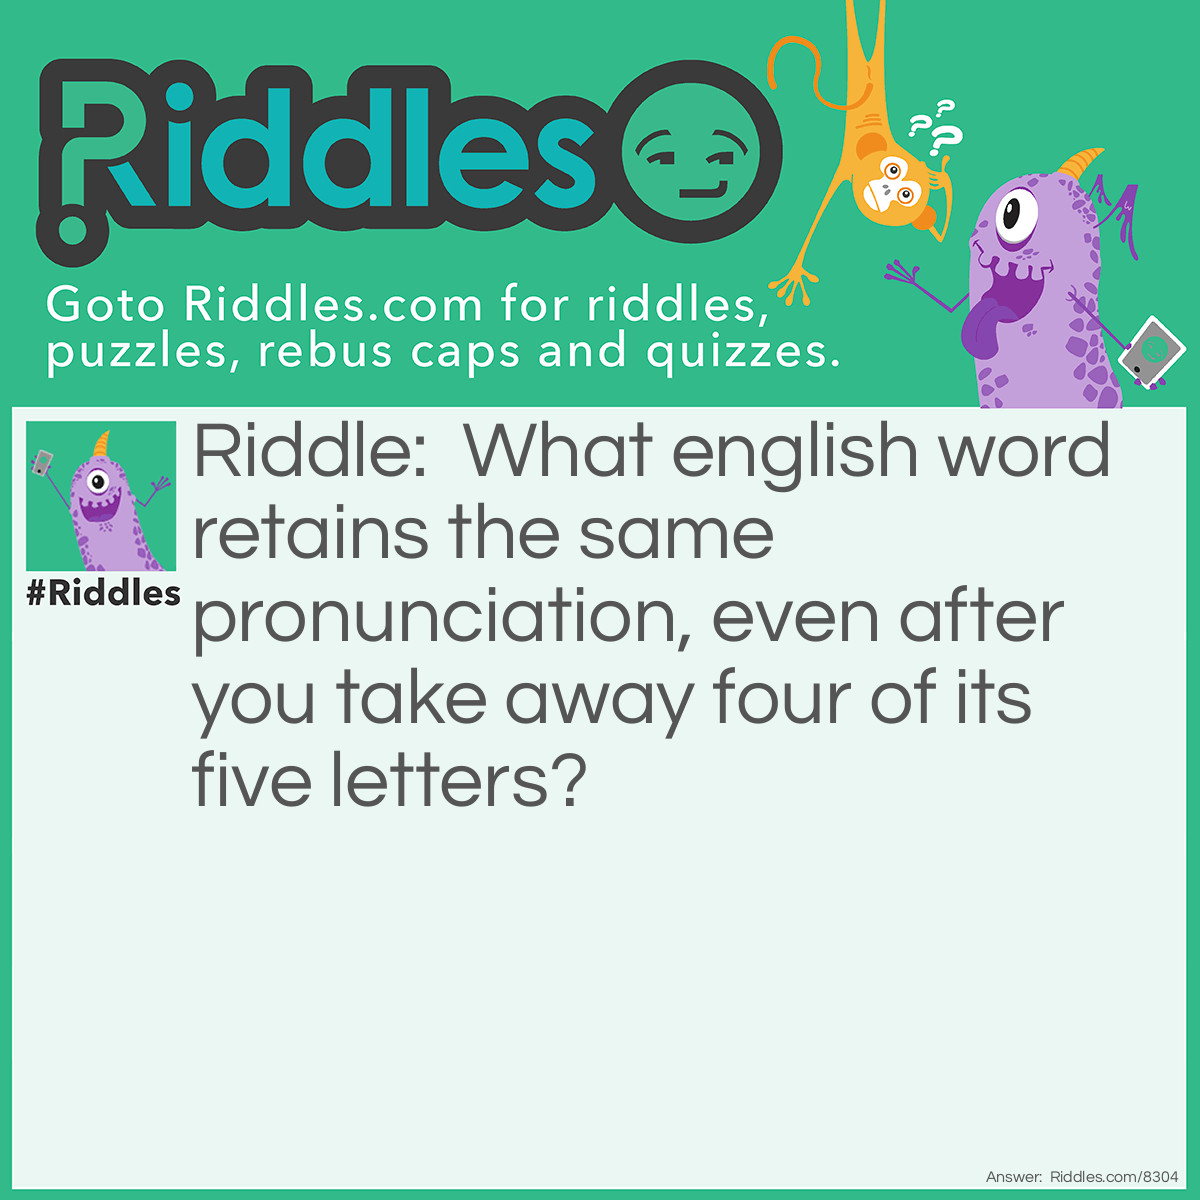 Riddle: What english word retains the same pronunciation, even after you take away four of its five letters? Answer: Queue.